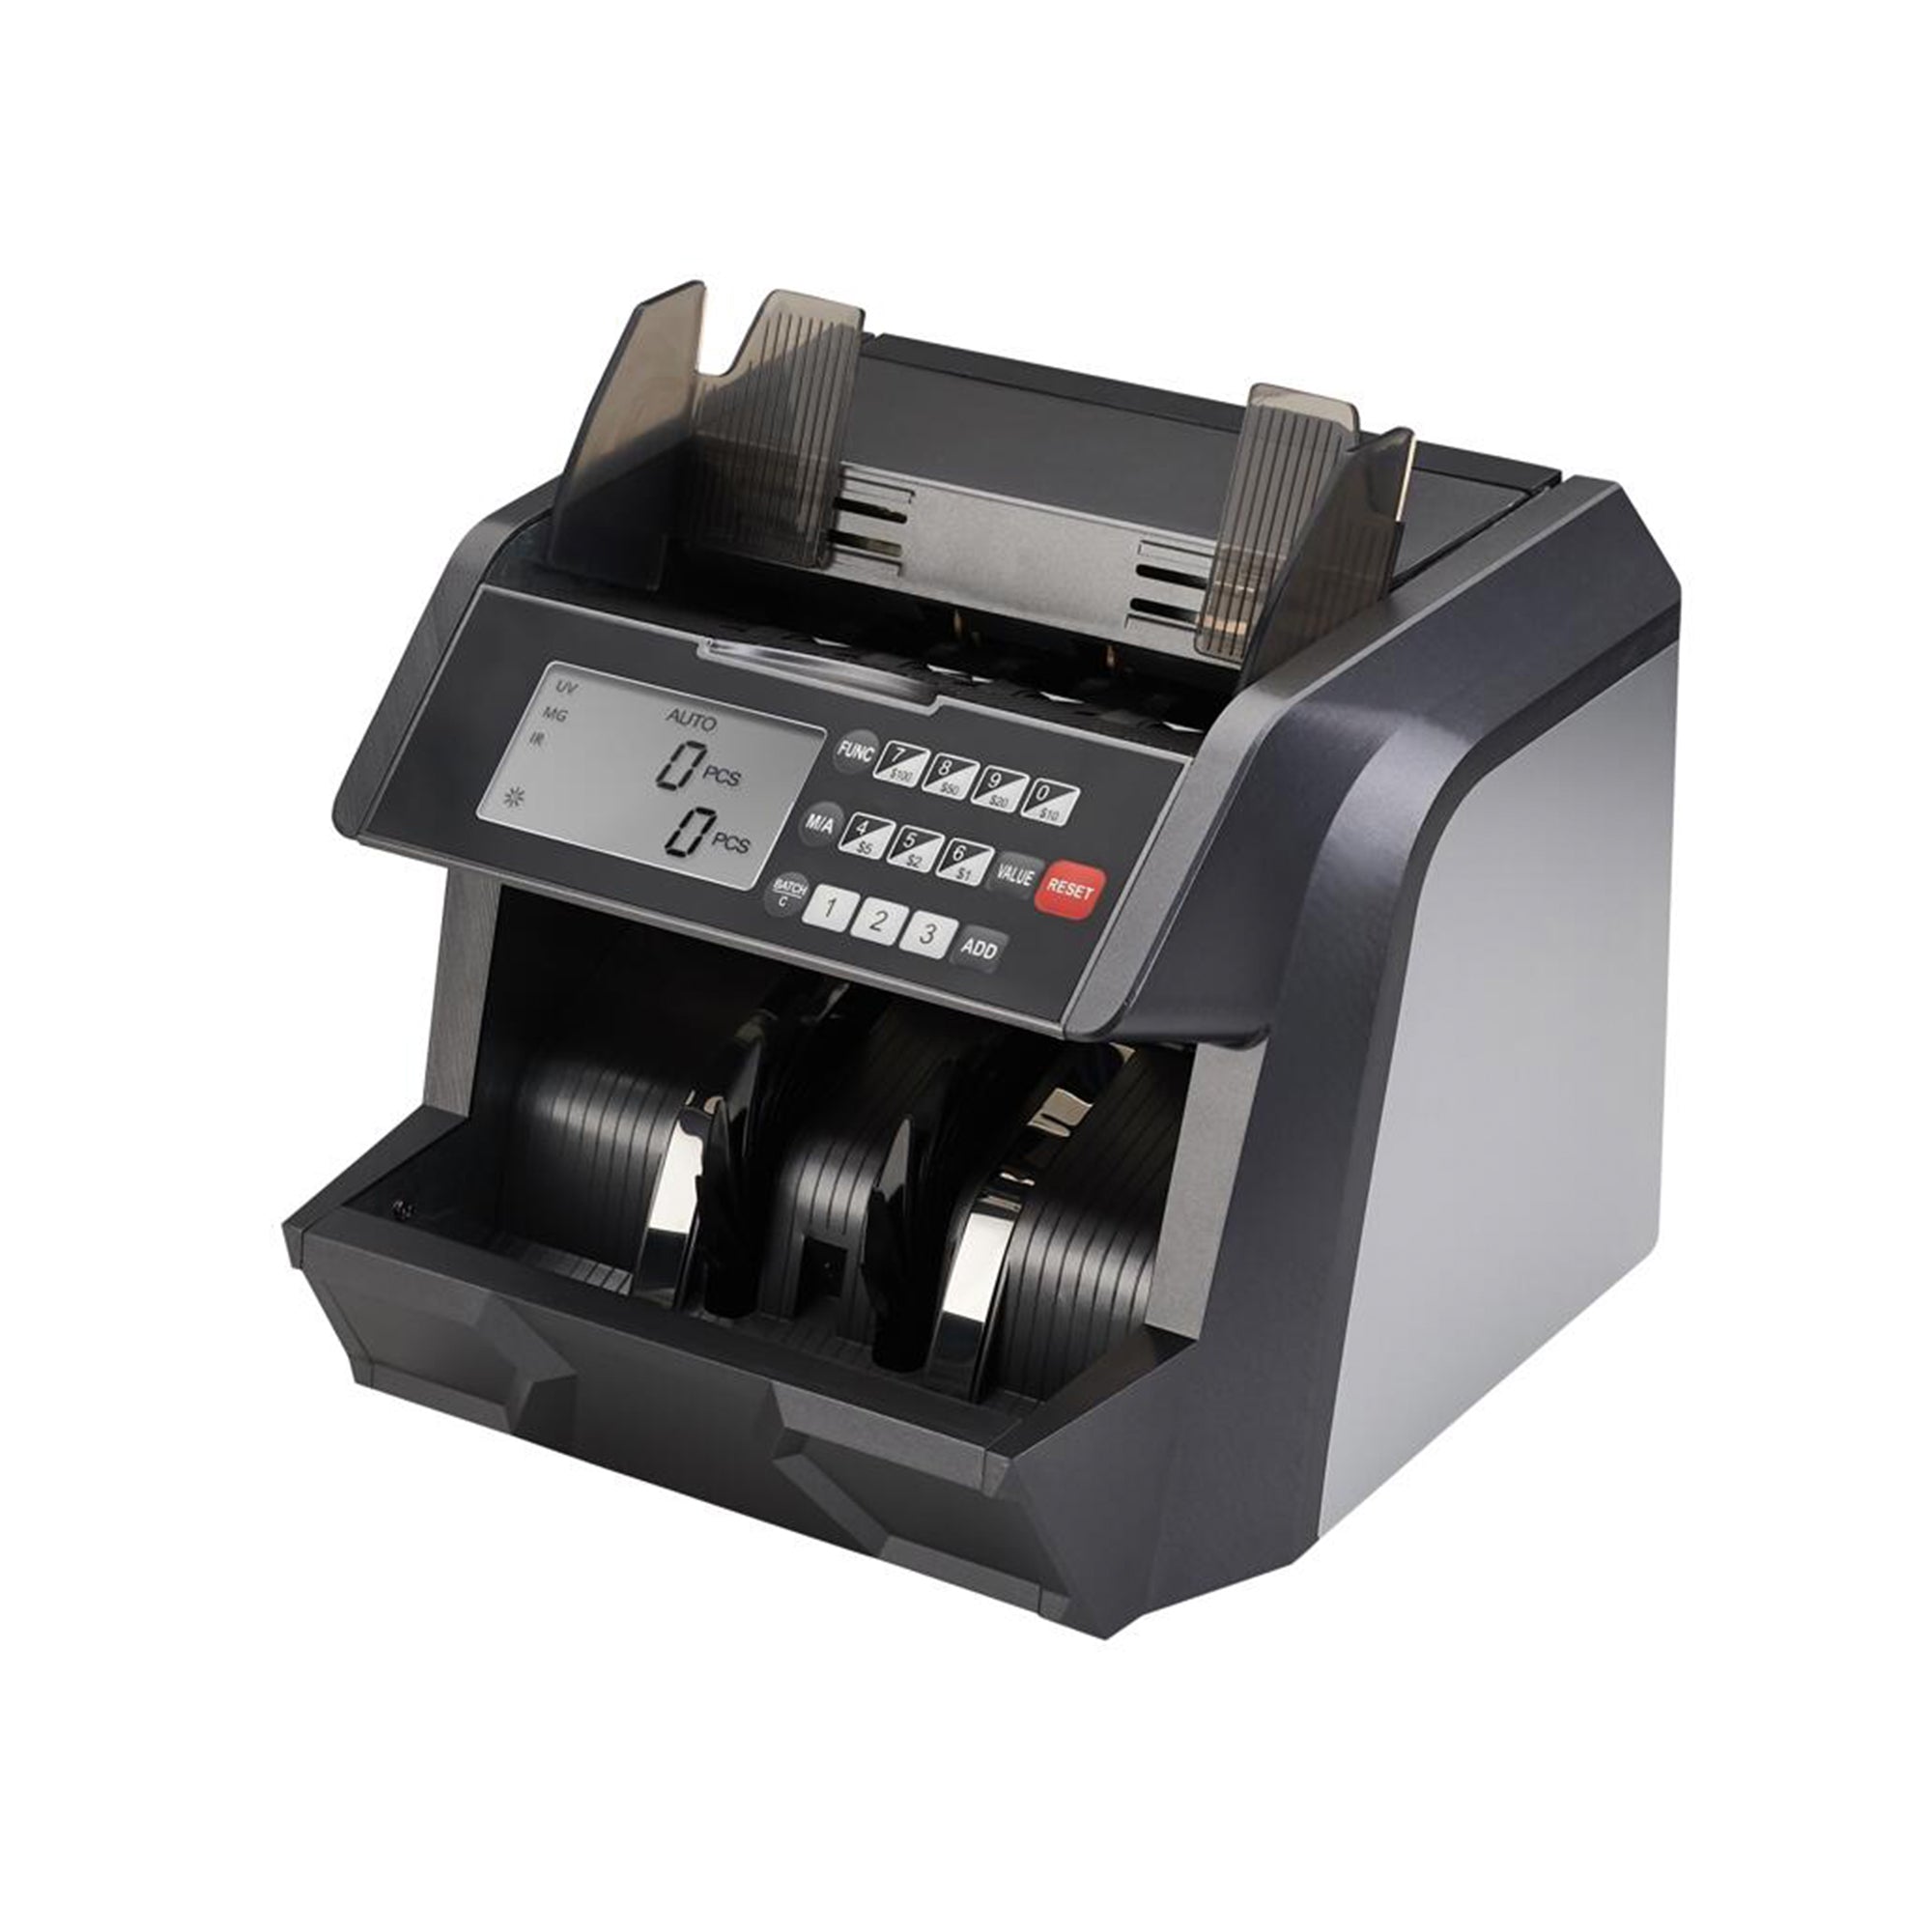 RBC-EG100, Bill Counter with Value Detection, Counterfeit Identification